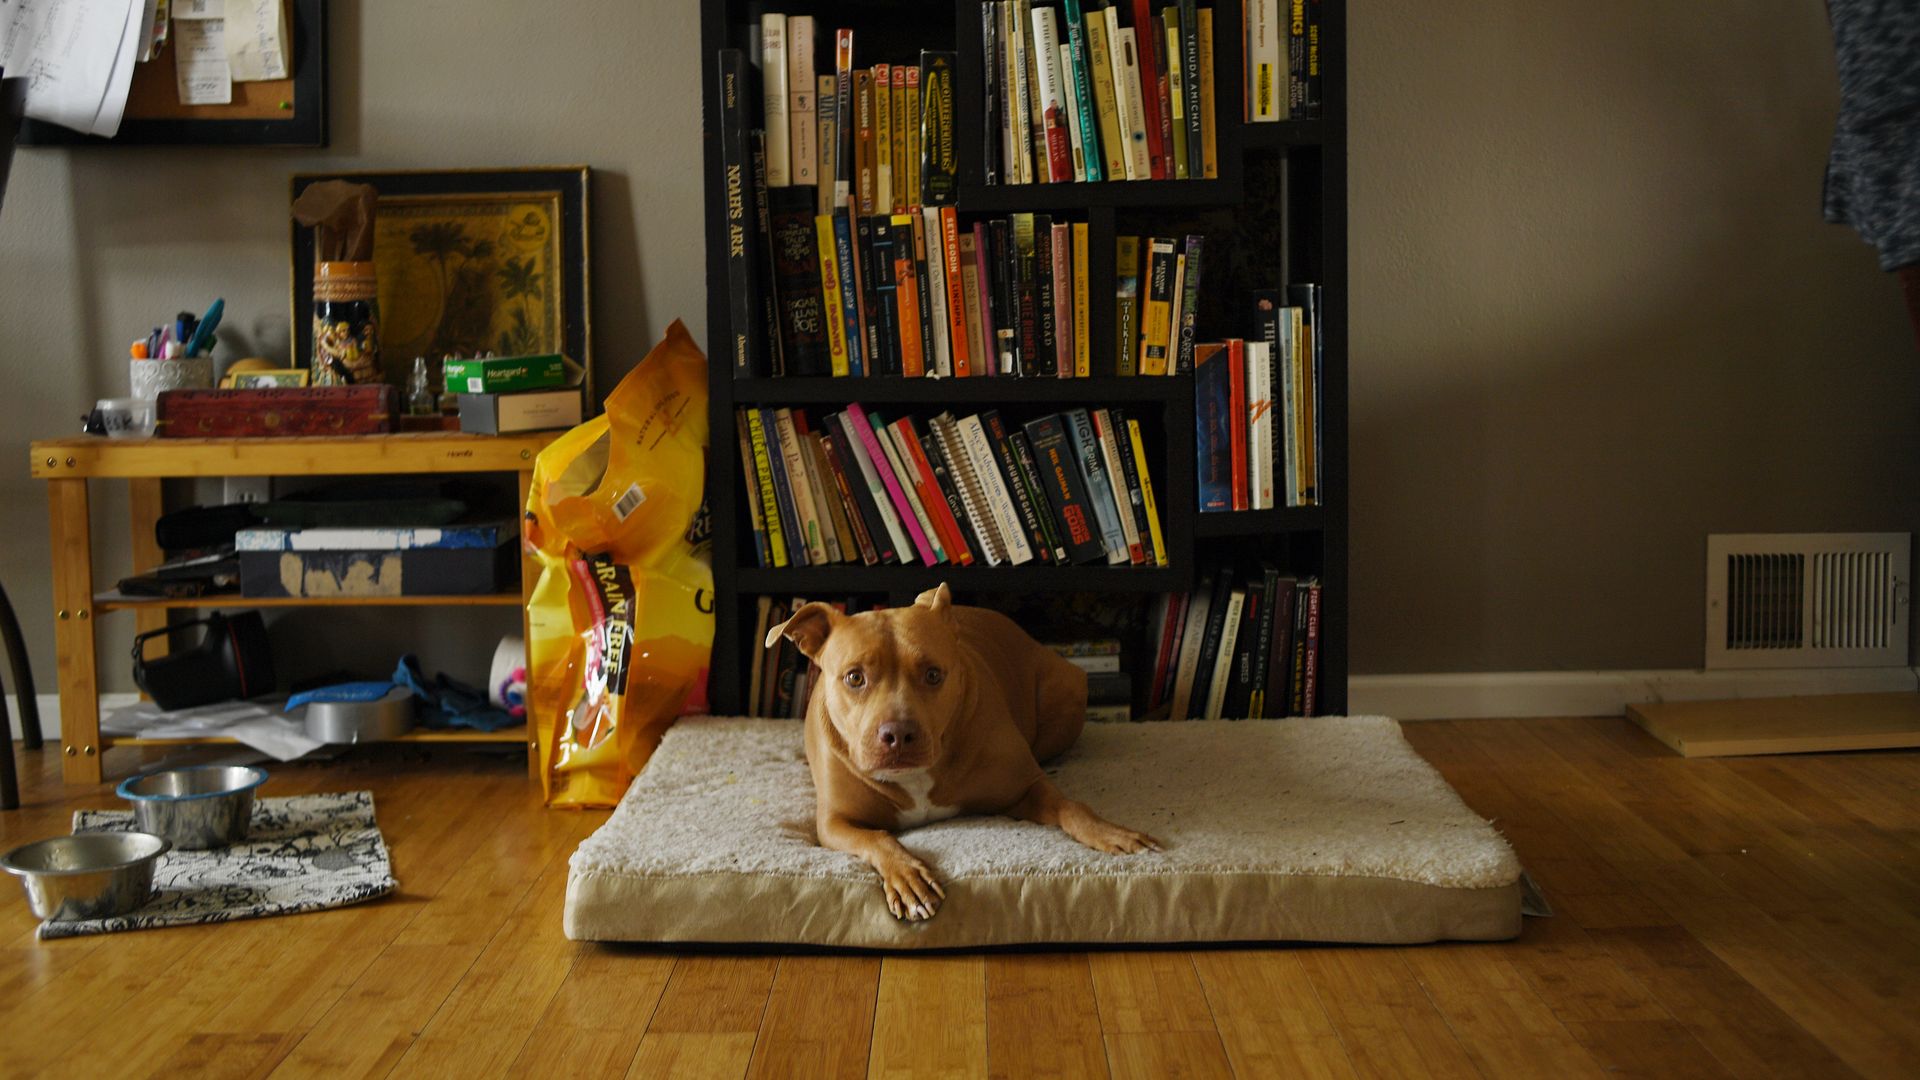 A brown pit bull dog sits on a bed on the floor with a book shelf in the background and its food and water bowls nearby